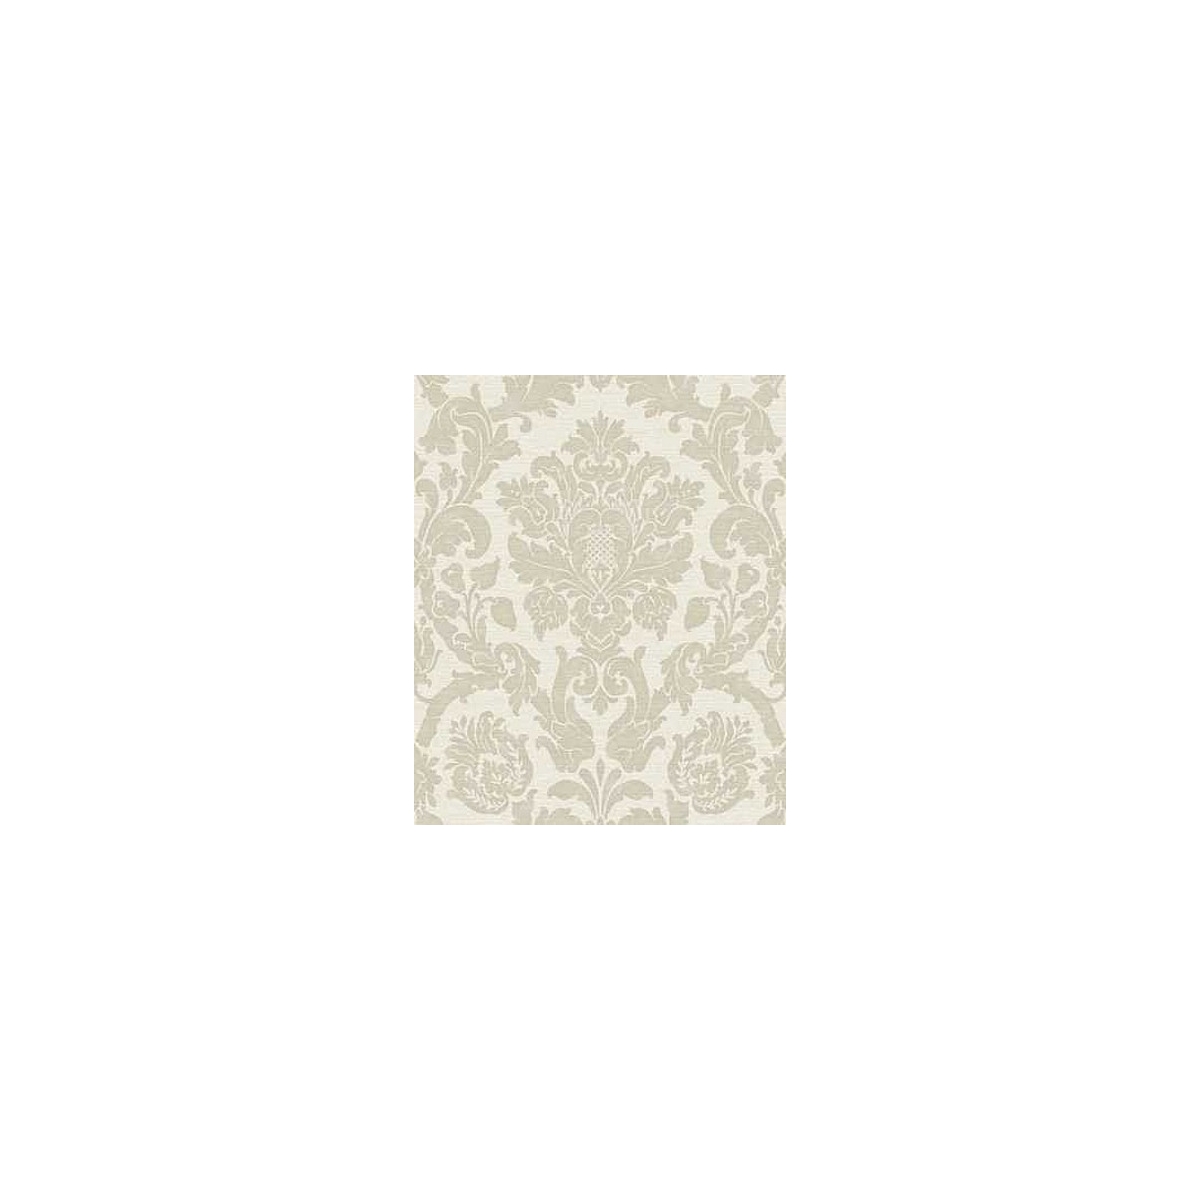 By Brand Grandeco Kensington Cream And Silver Damask Wallpaper